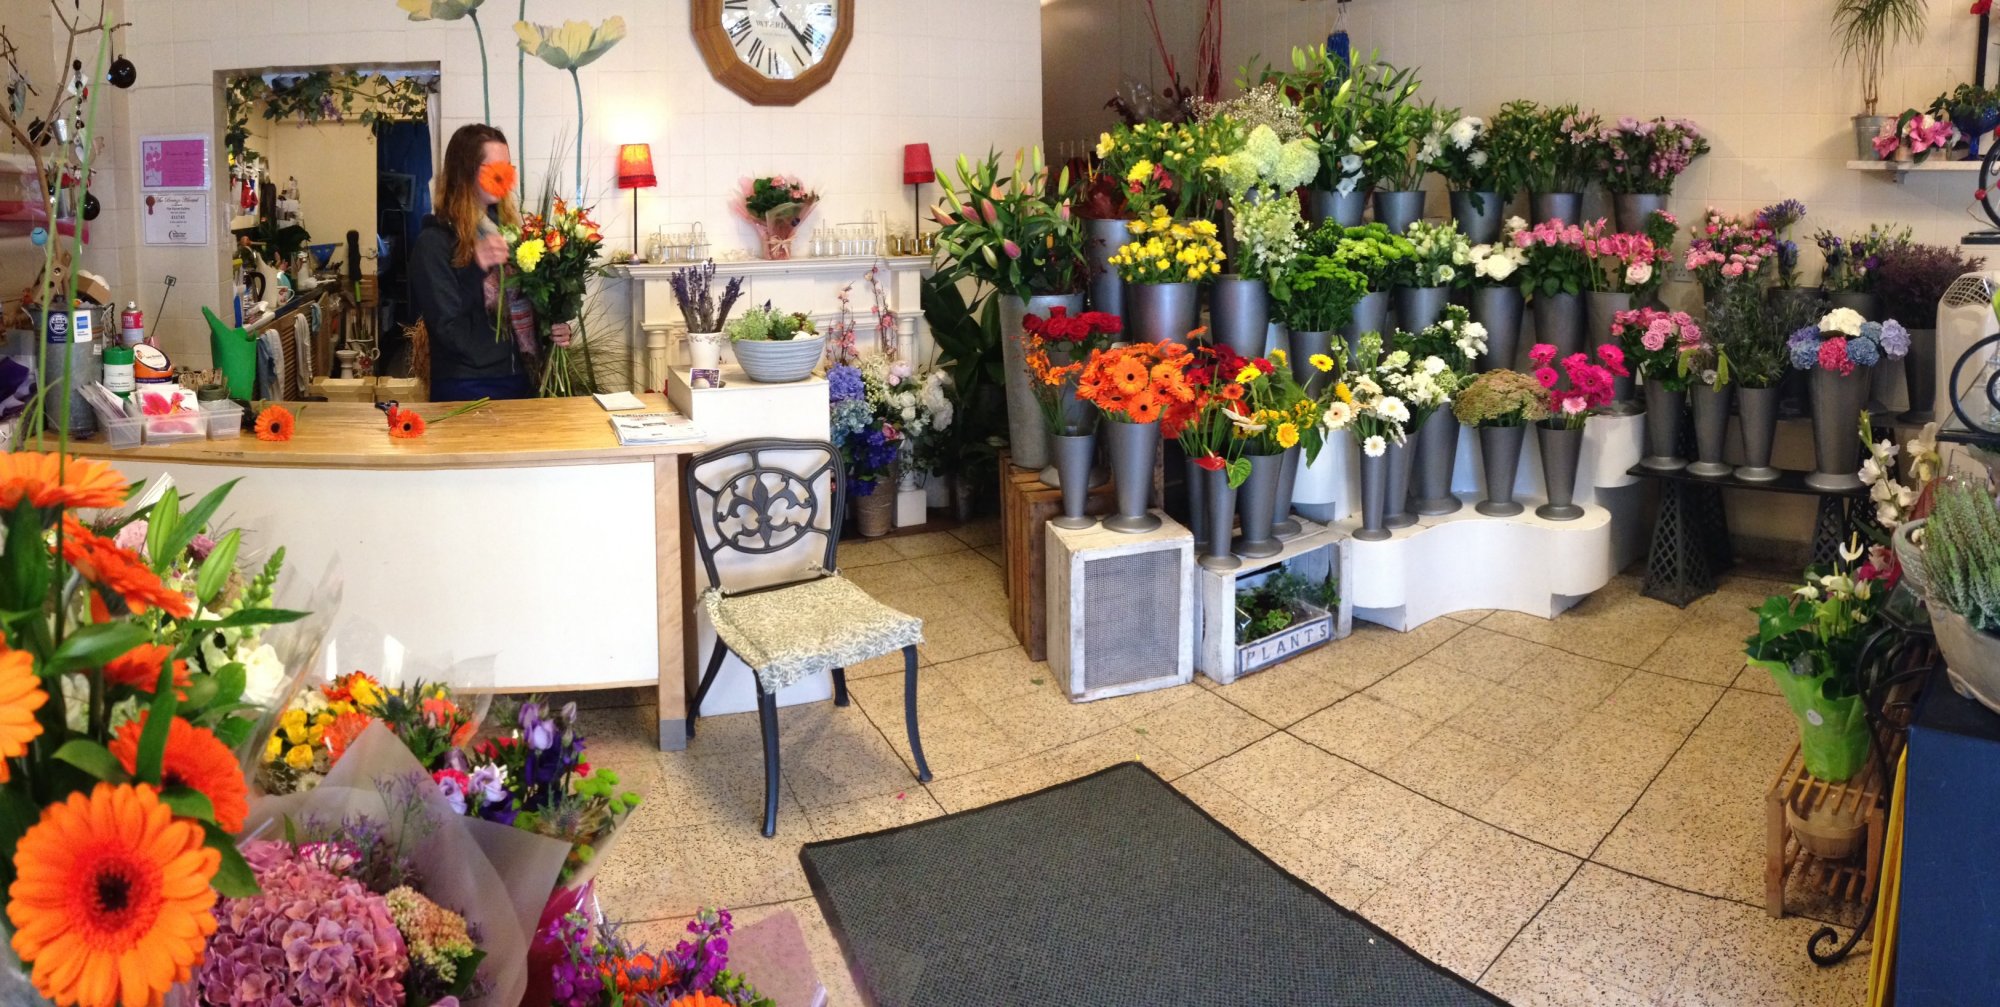 about-wendover-resident-flower-gallery-friendly-expert-service-fresh-seasonal-plants-delivered-direct-Holland-shop